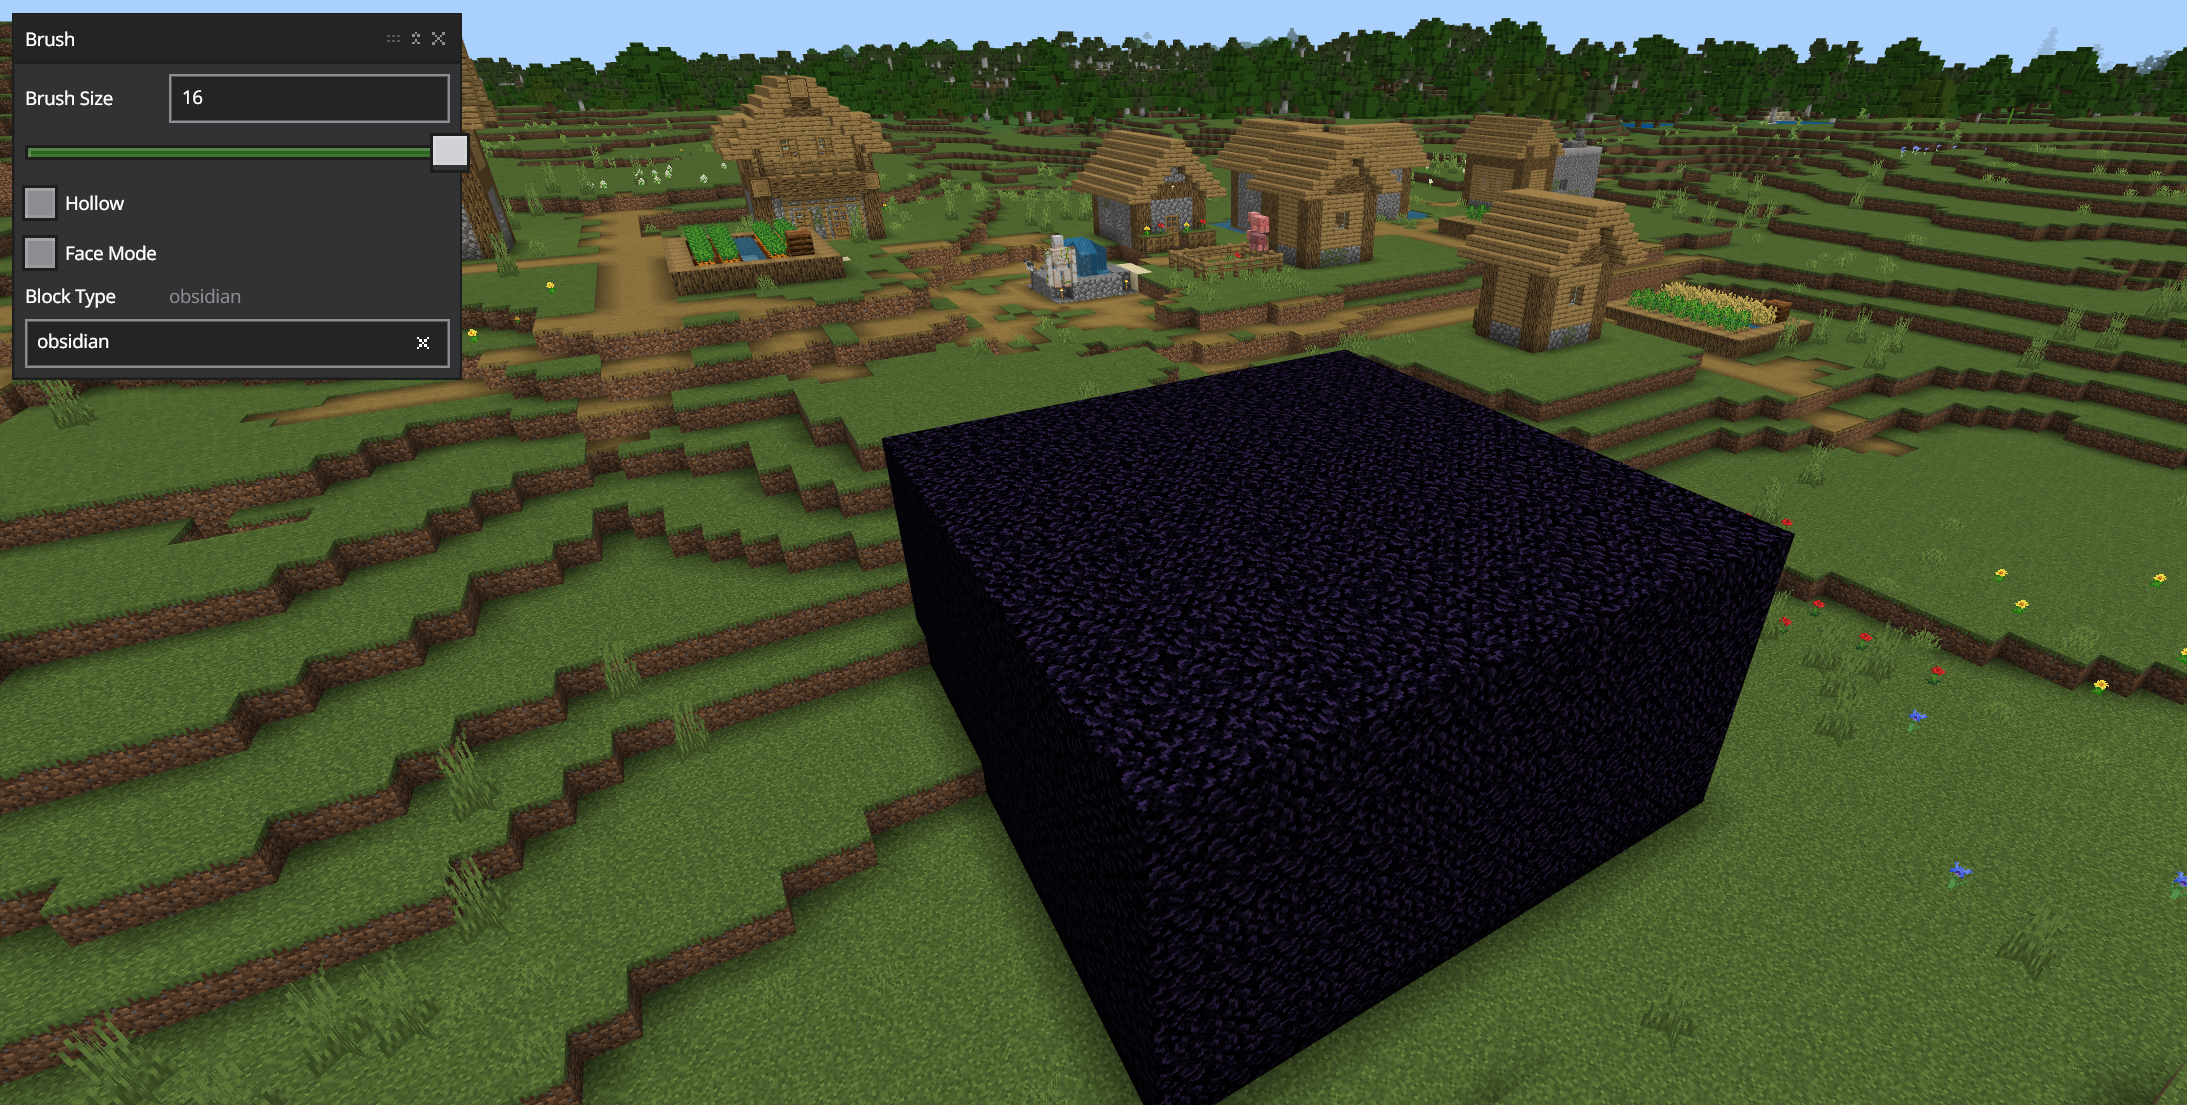 An obsidian base is placed with the Brush tool